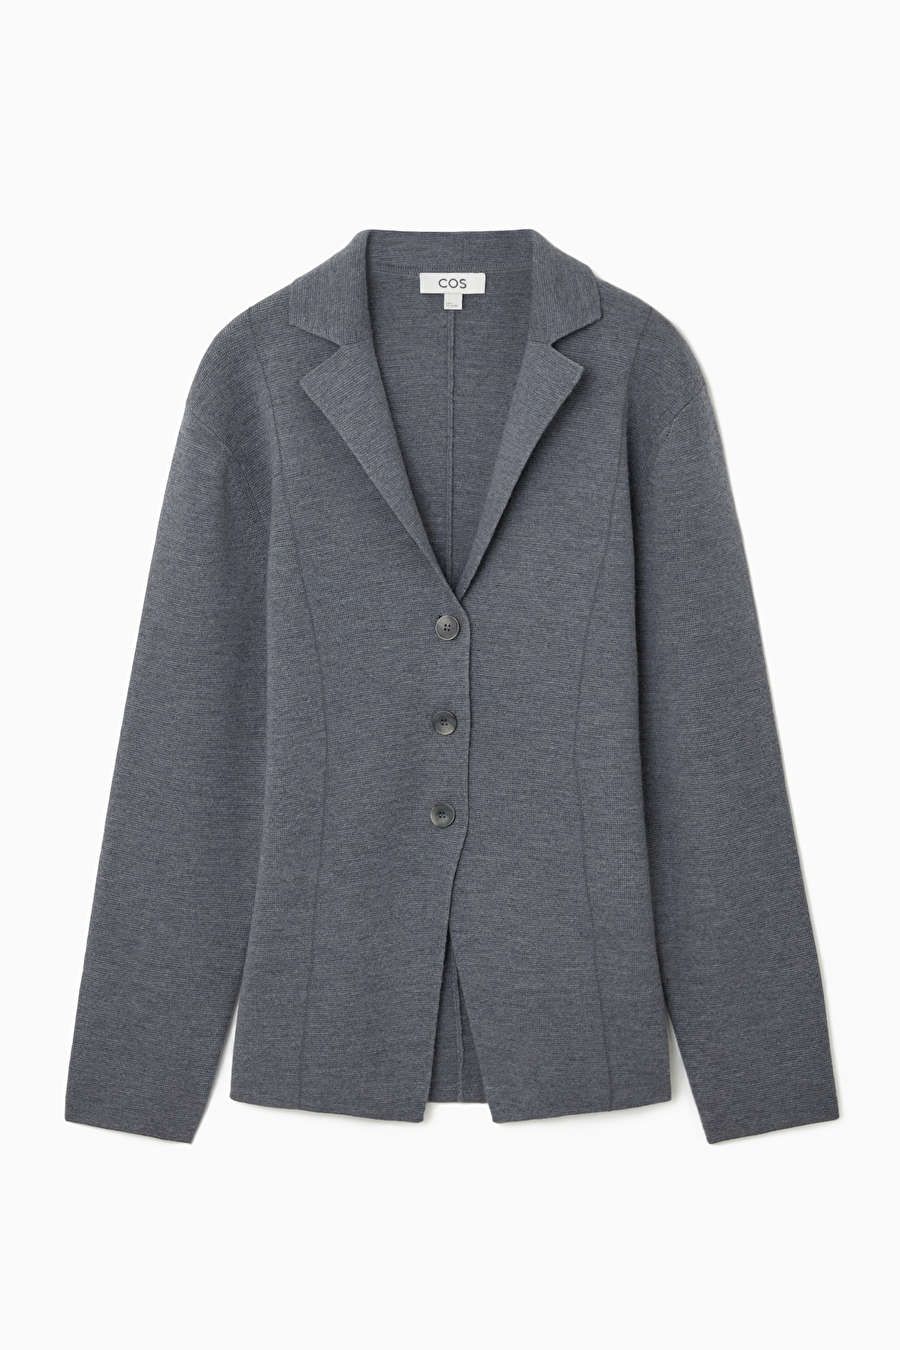 KNITTED WAISTED BLAZER | COS UK